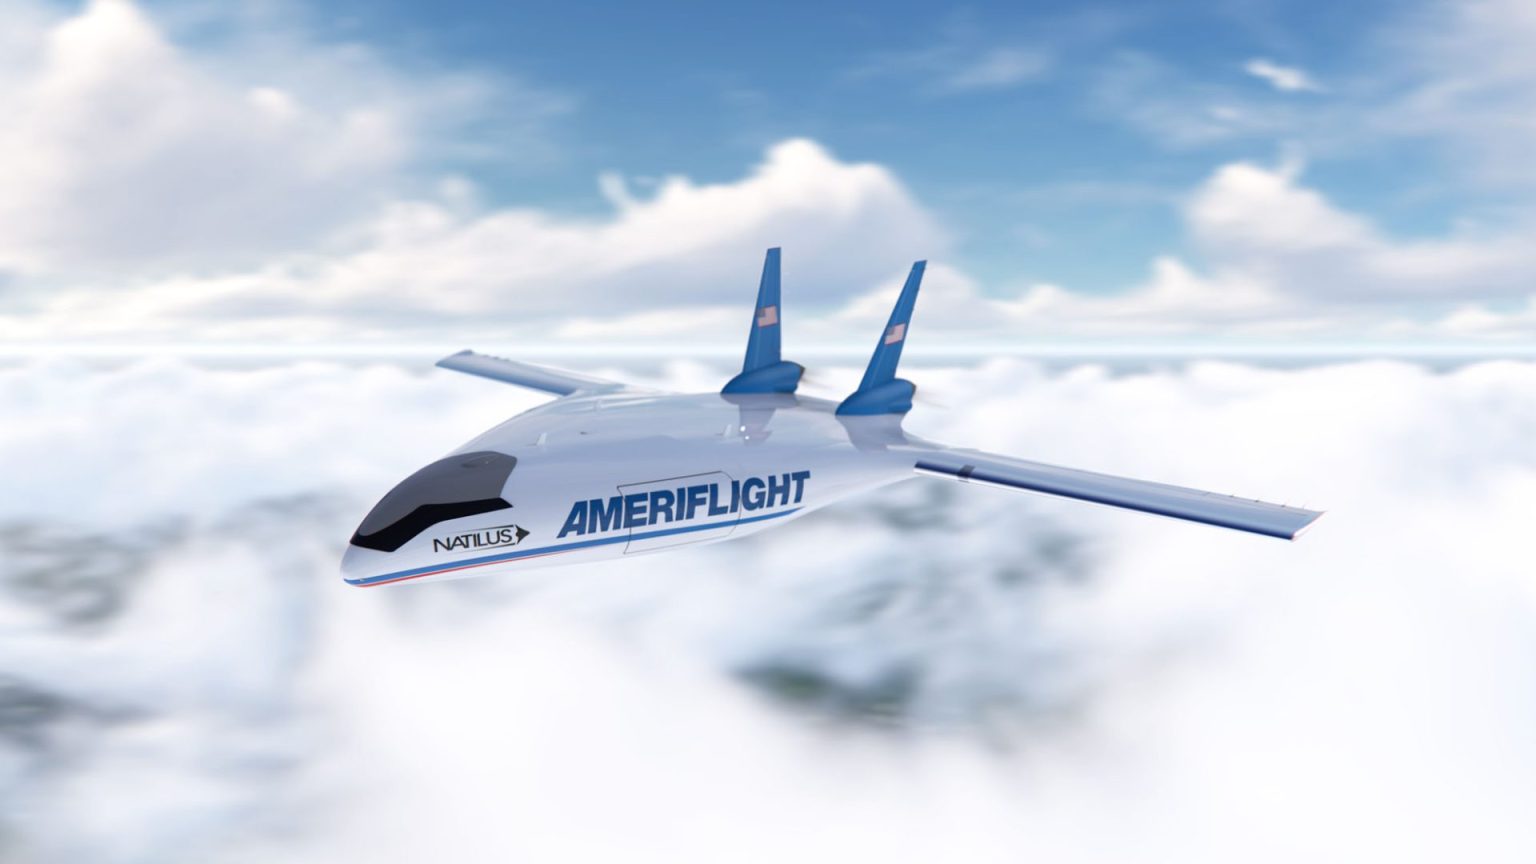 Ameriflight,regional feeder airline,Natilus,carbon emissions,blended-wing uniframe body,aerodynamics,usable volume,pilotless aircraft,autonomous freighter,low density cargo,large autonomous cargo planes,lower cost of operation,alternative power sources,autonomous aviation,reduce need for pilots,remote-controlled airplanes,air freight,shipping,e-commerce